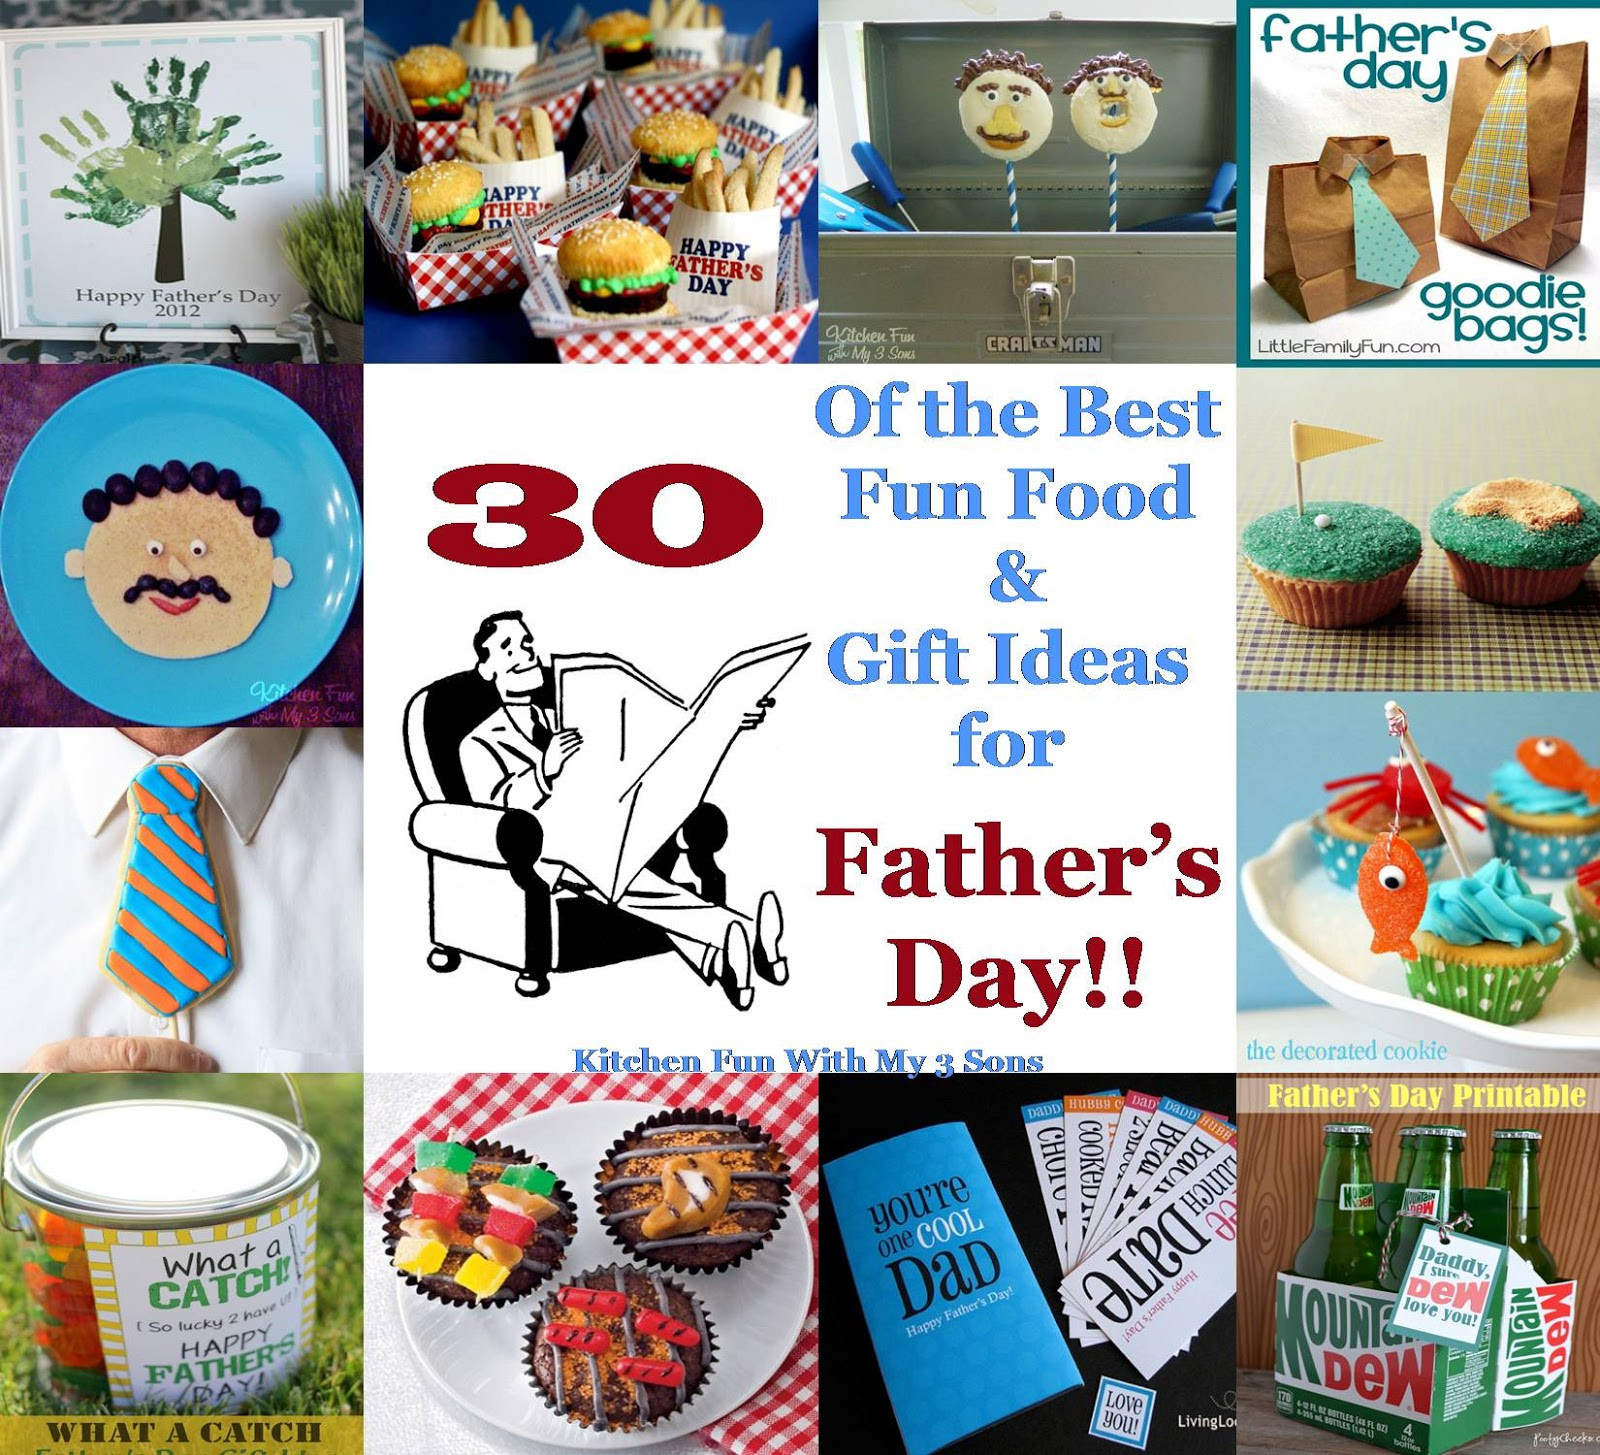 Father'S Day Food Gift Ideas
 30 of the Best Fun Food & Gift Ideas for Father s Day